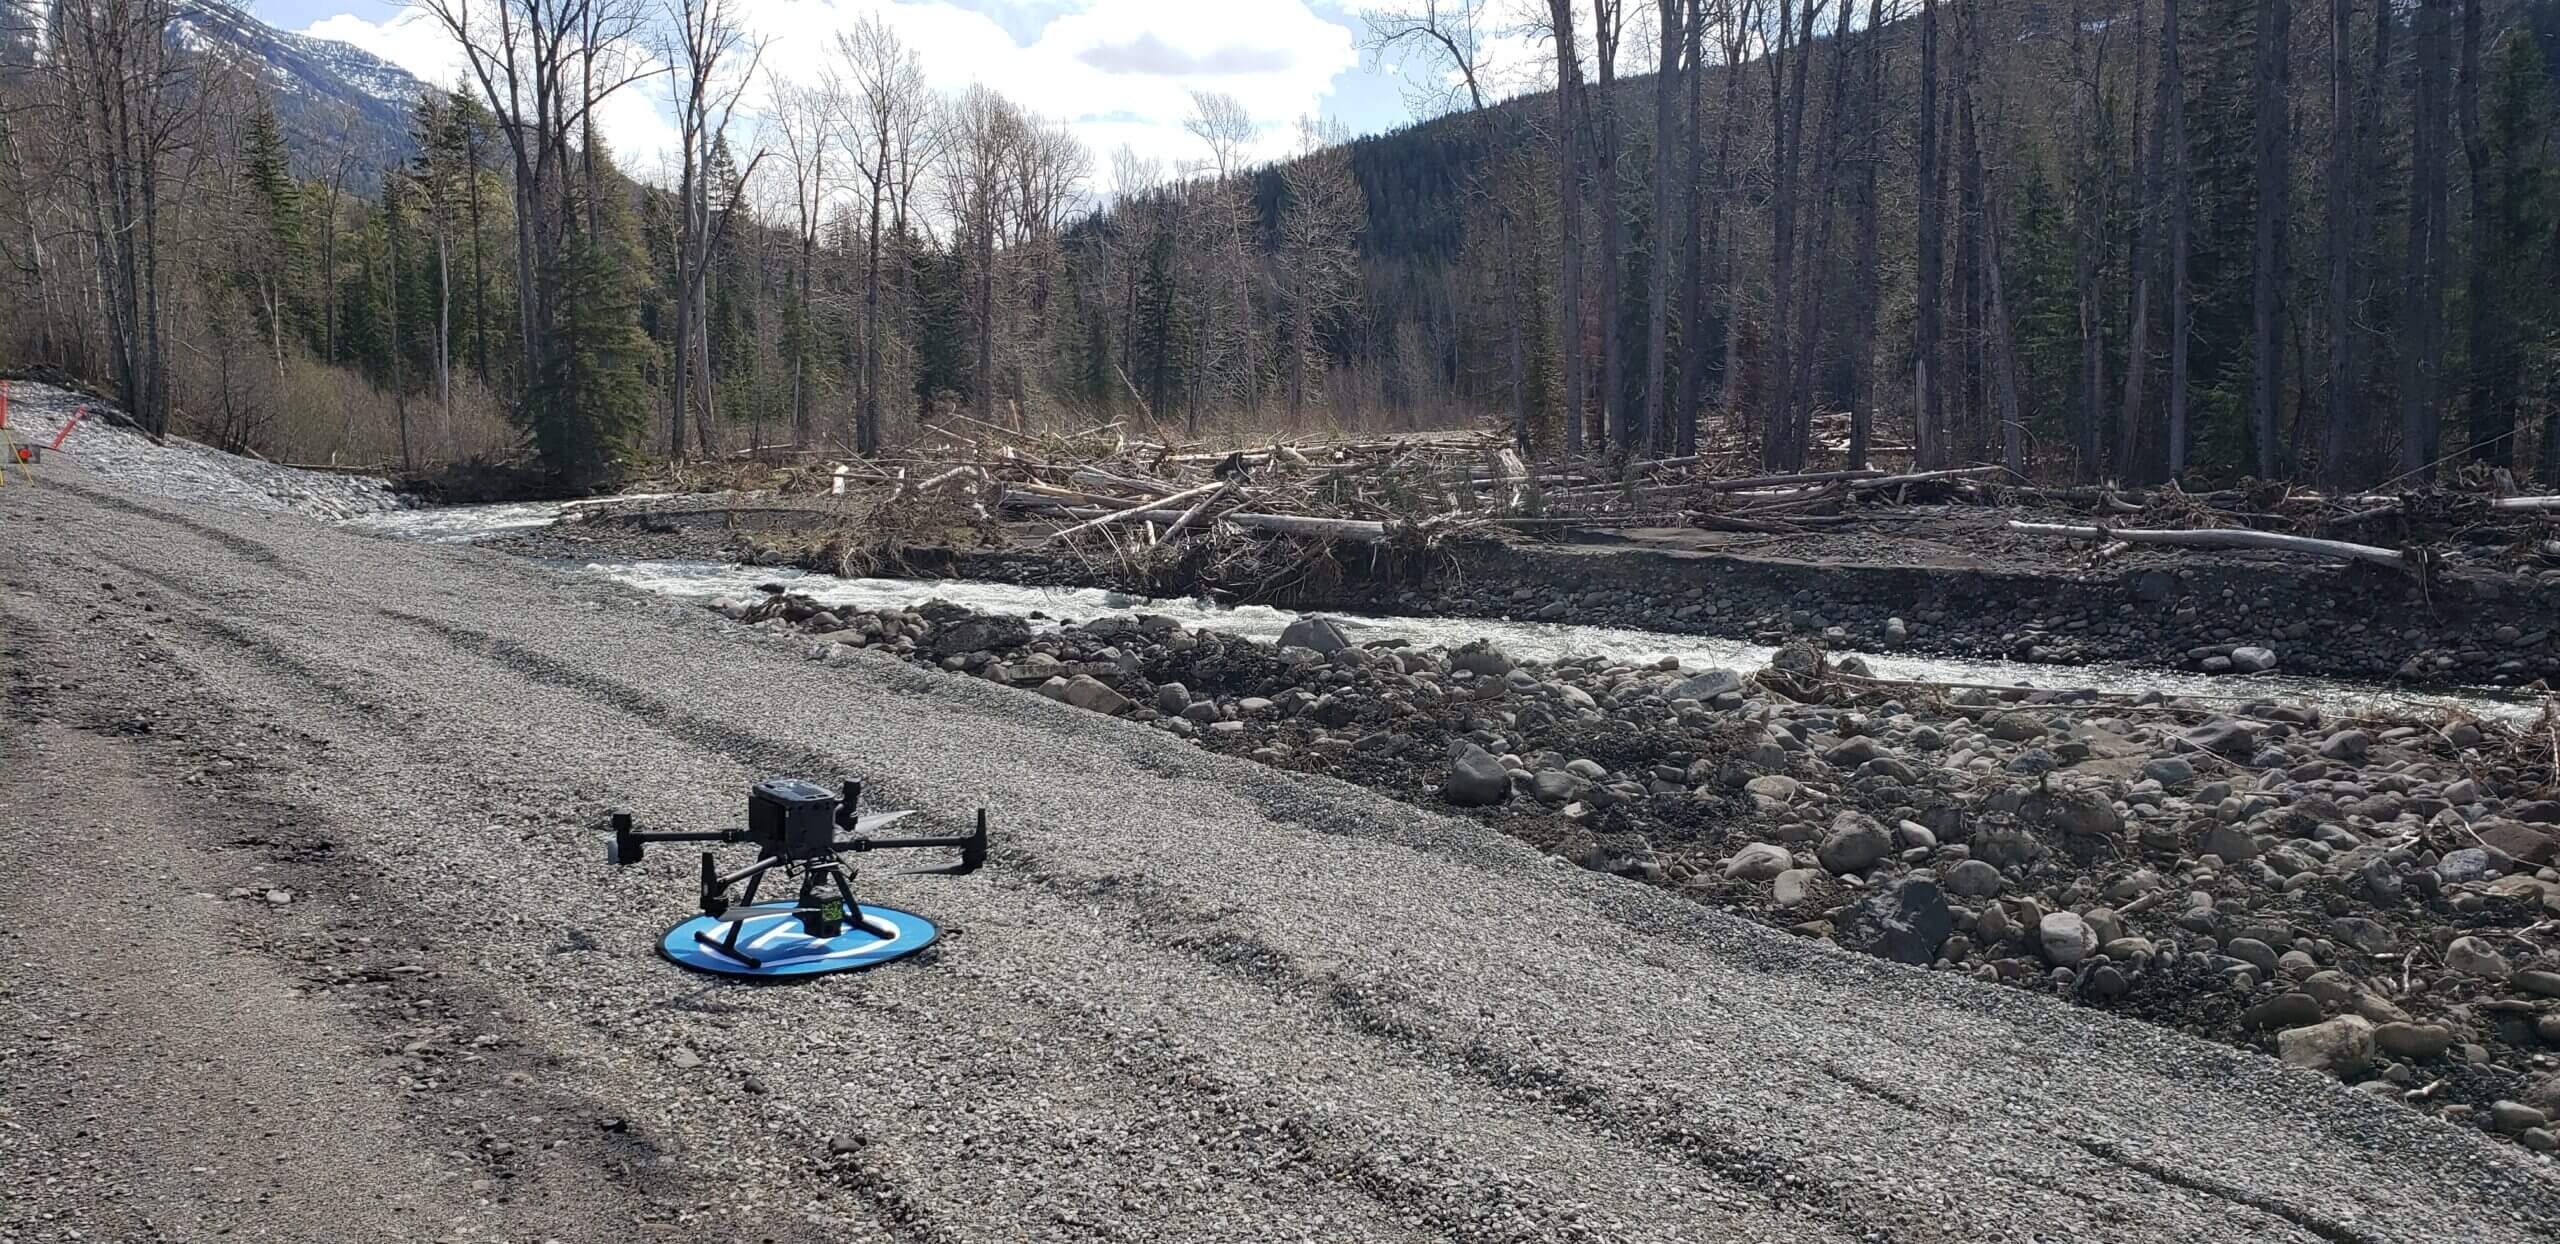 Drone in Hydrology and Water Management: Applications, Challenges, and Perspectives